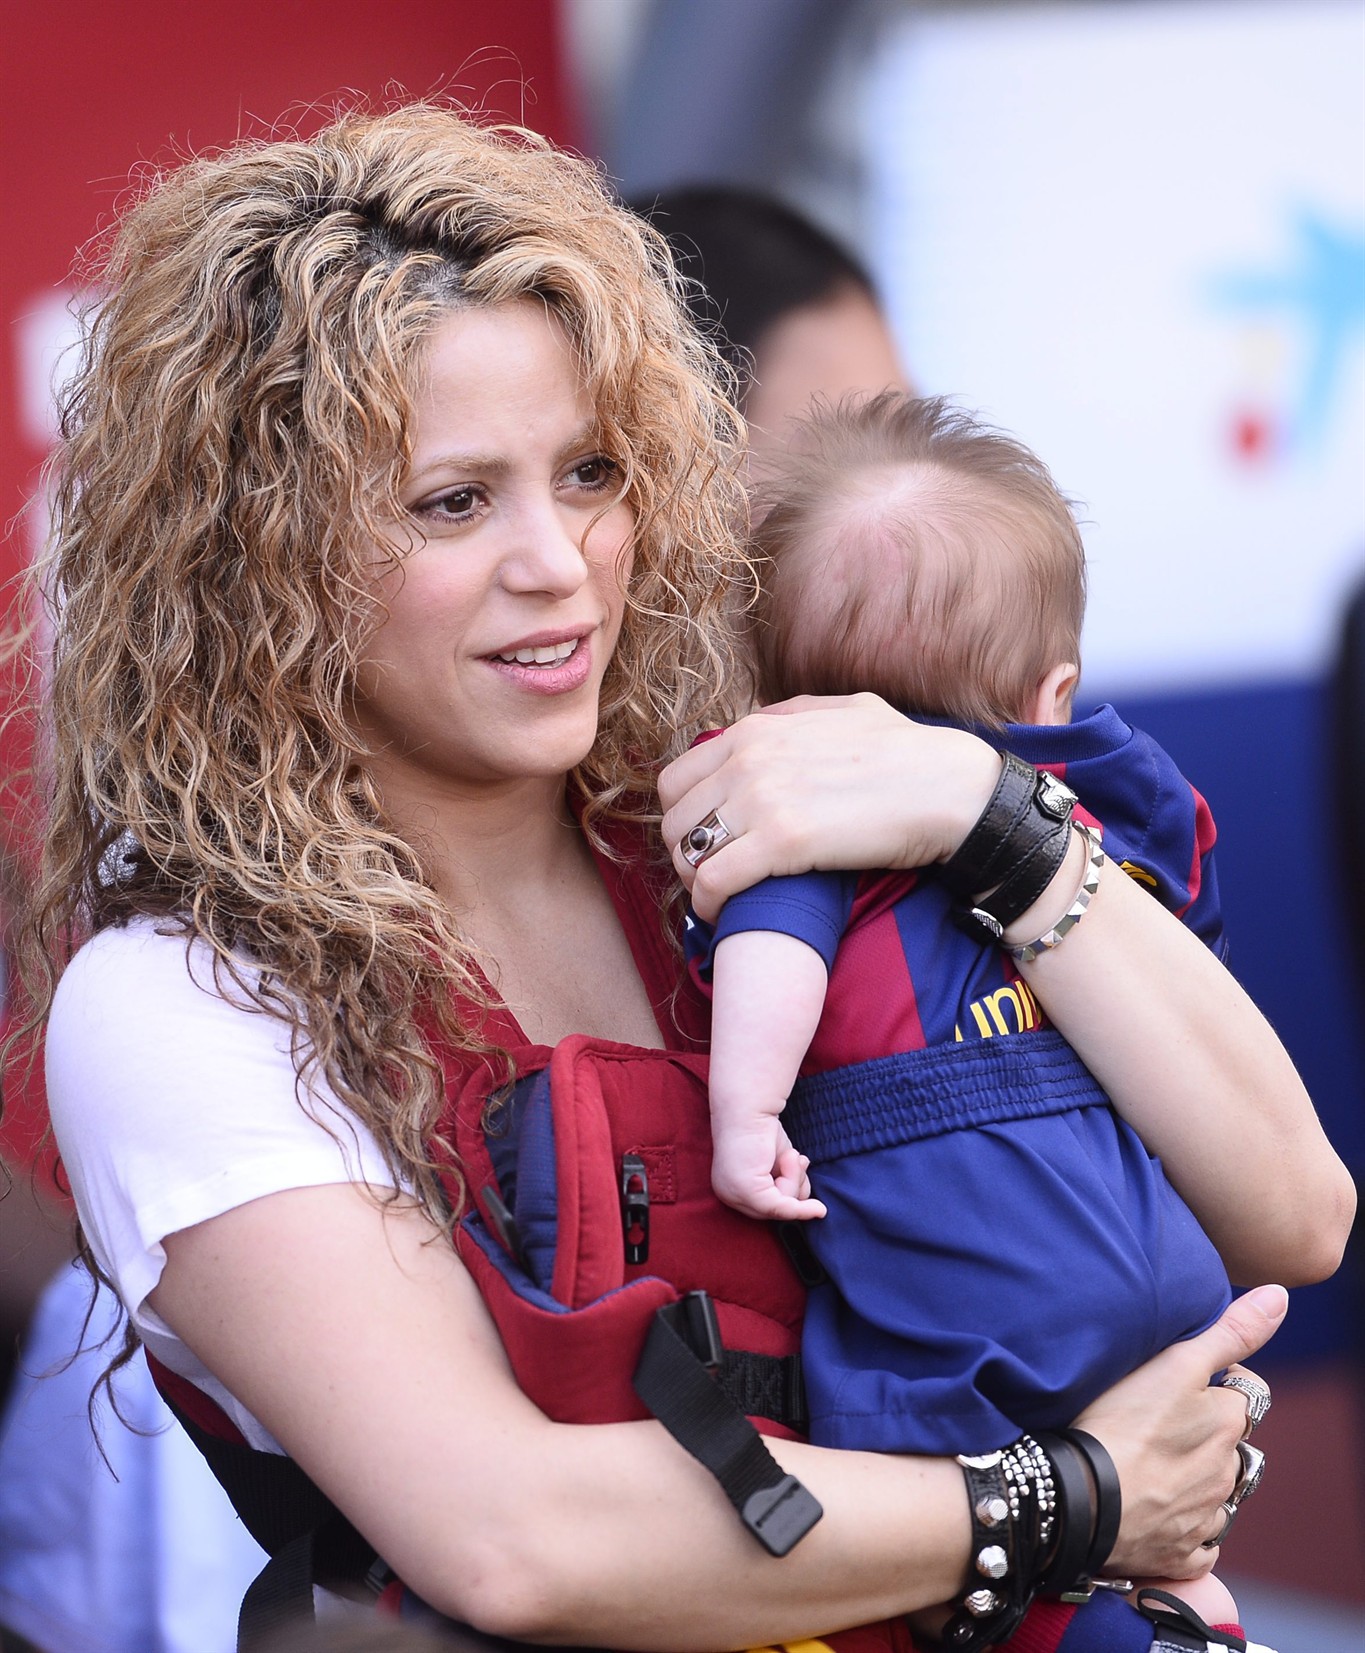 Shakira and Pique may have another athlete in the family | CityNews  Vancouver